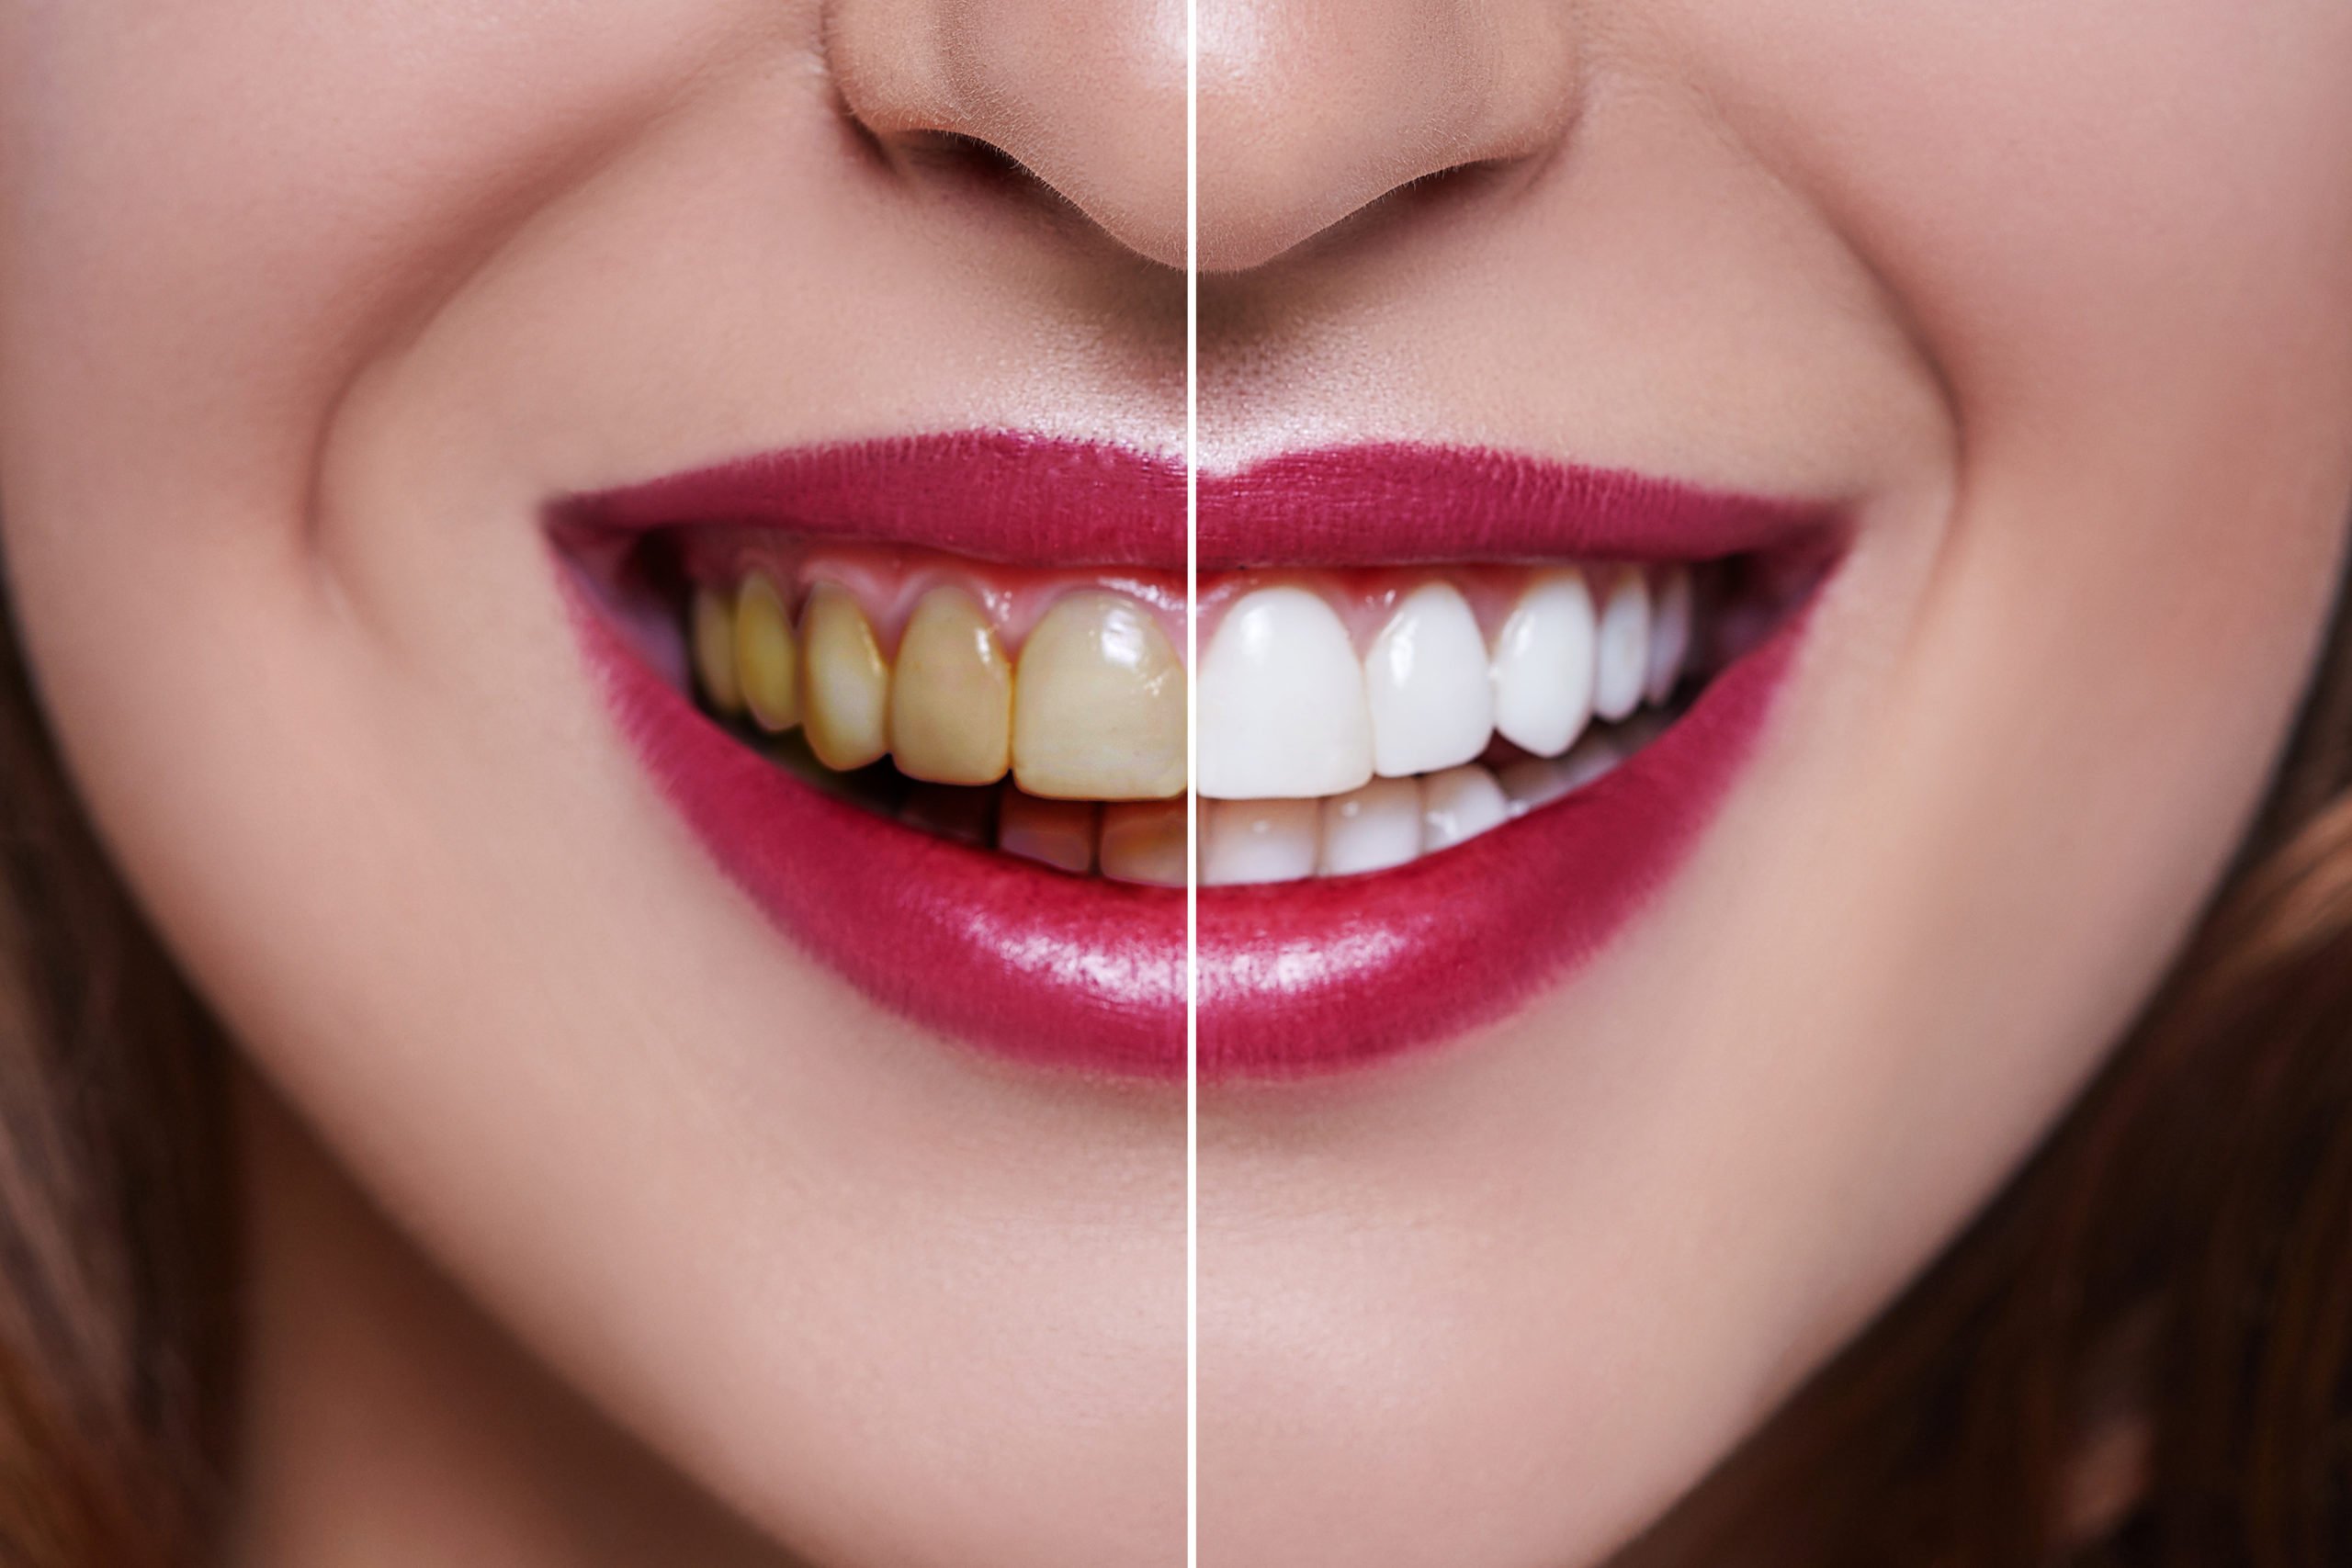 How Much Is A Full Set Of Veneers With Insurance?